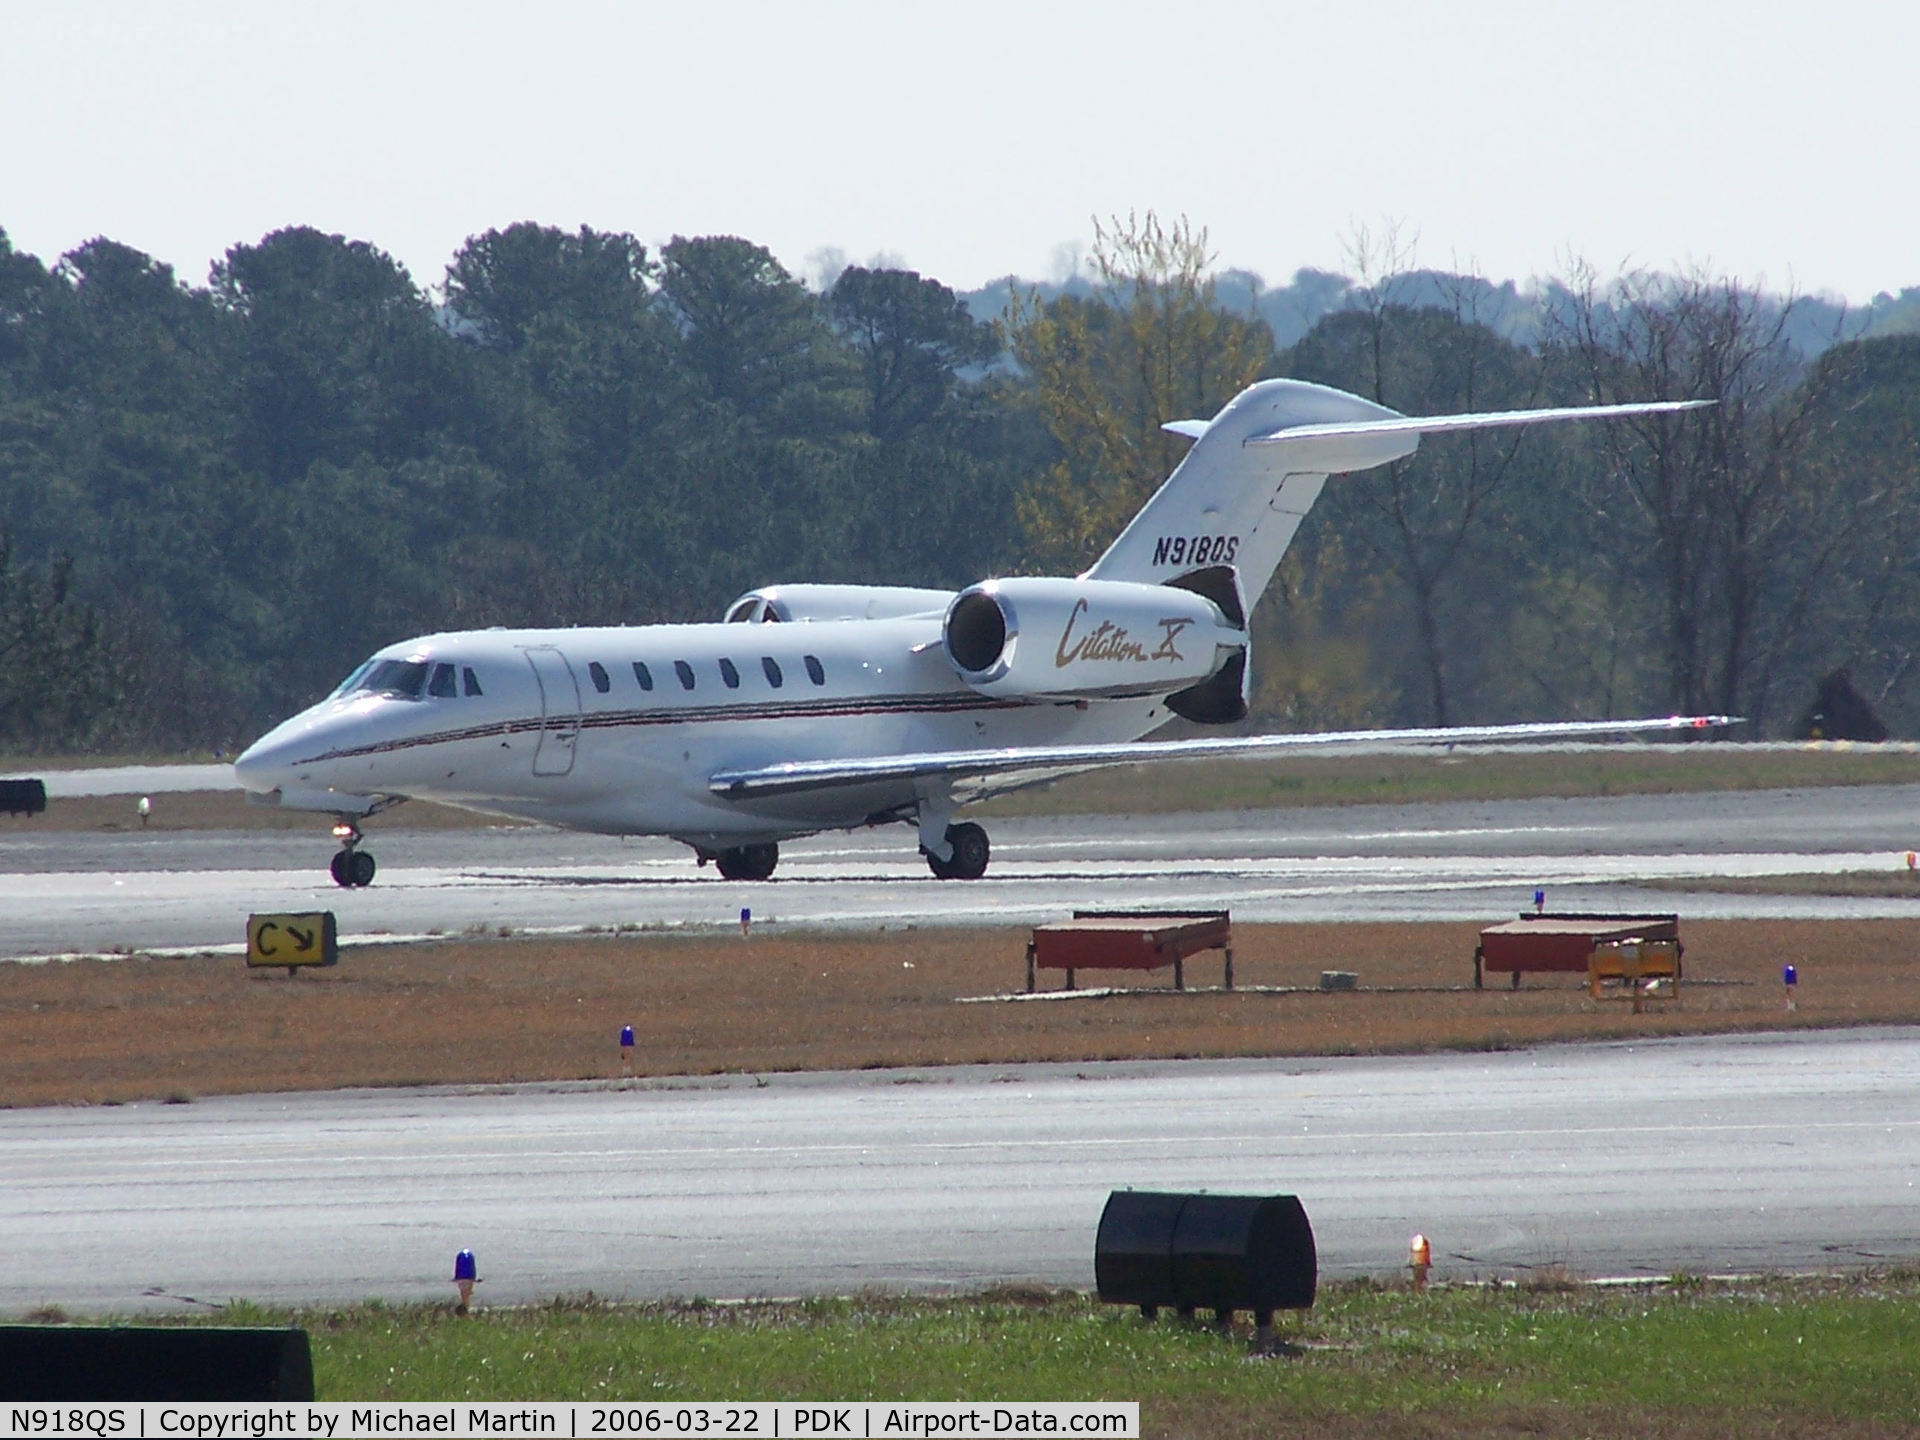 N918QS, 2003 Cessna 750 Citation X Citation X C/N 750-0223, Landing PDK on 2R with airbrakes extended